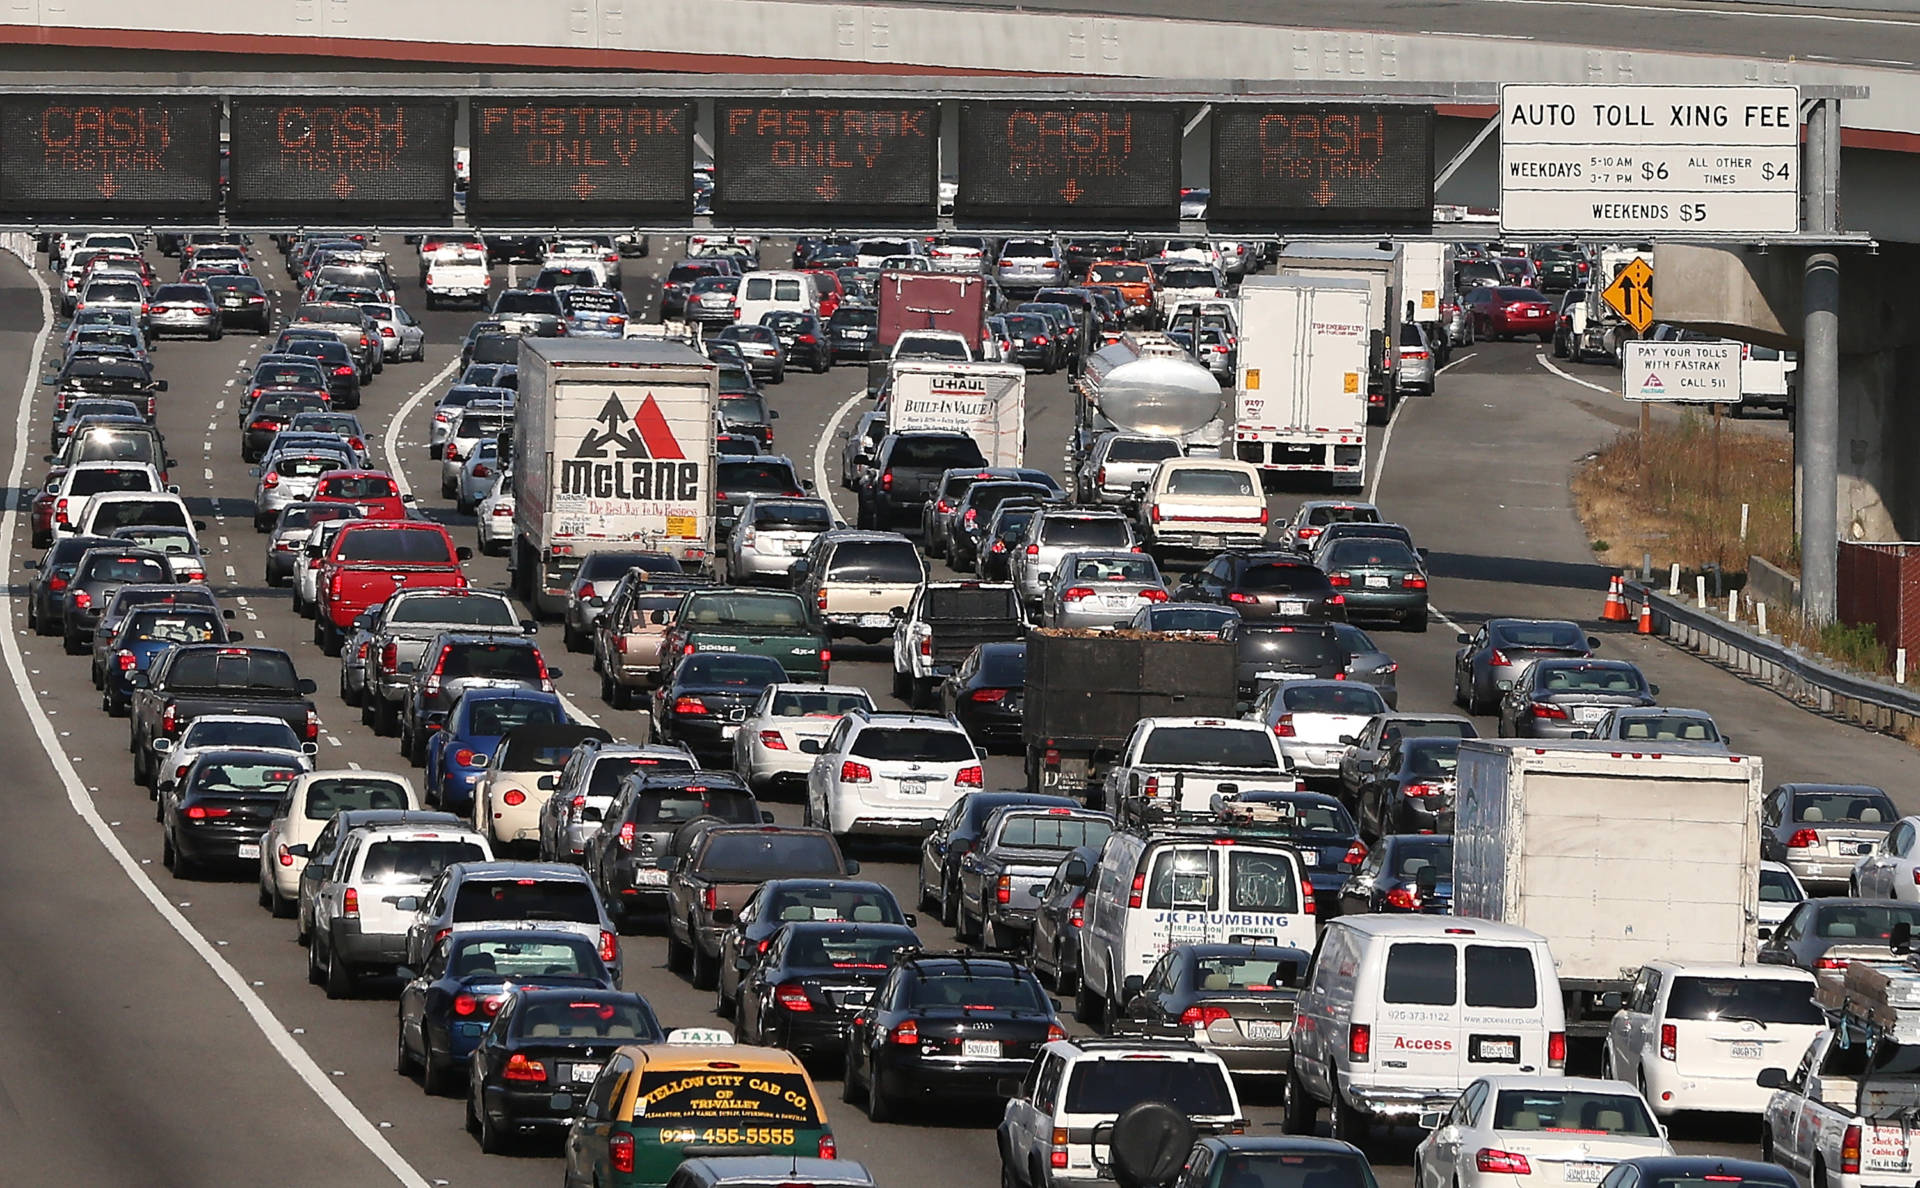 Commuter traffic at the Bay Bridge toll plaze pictured during the July 2013 BART strike.  Justin Sullivan/Getty Images